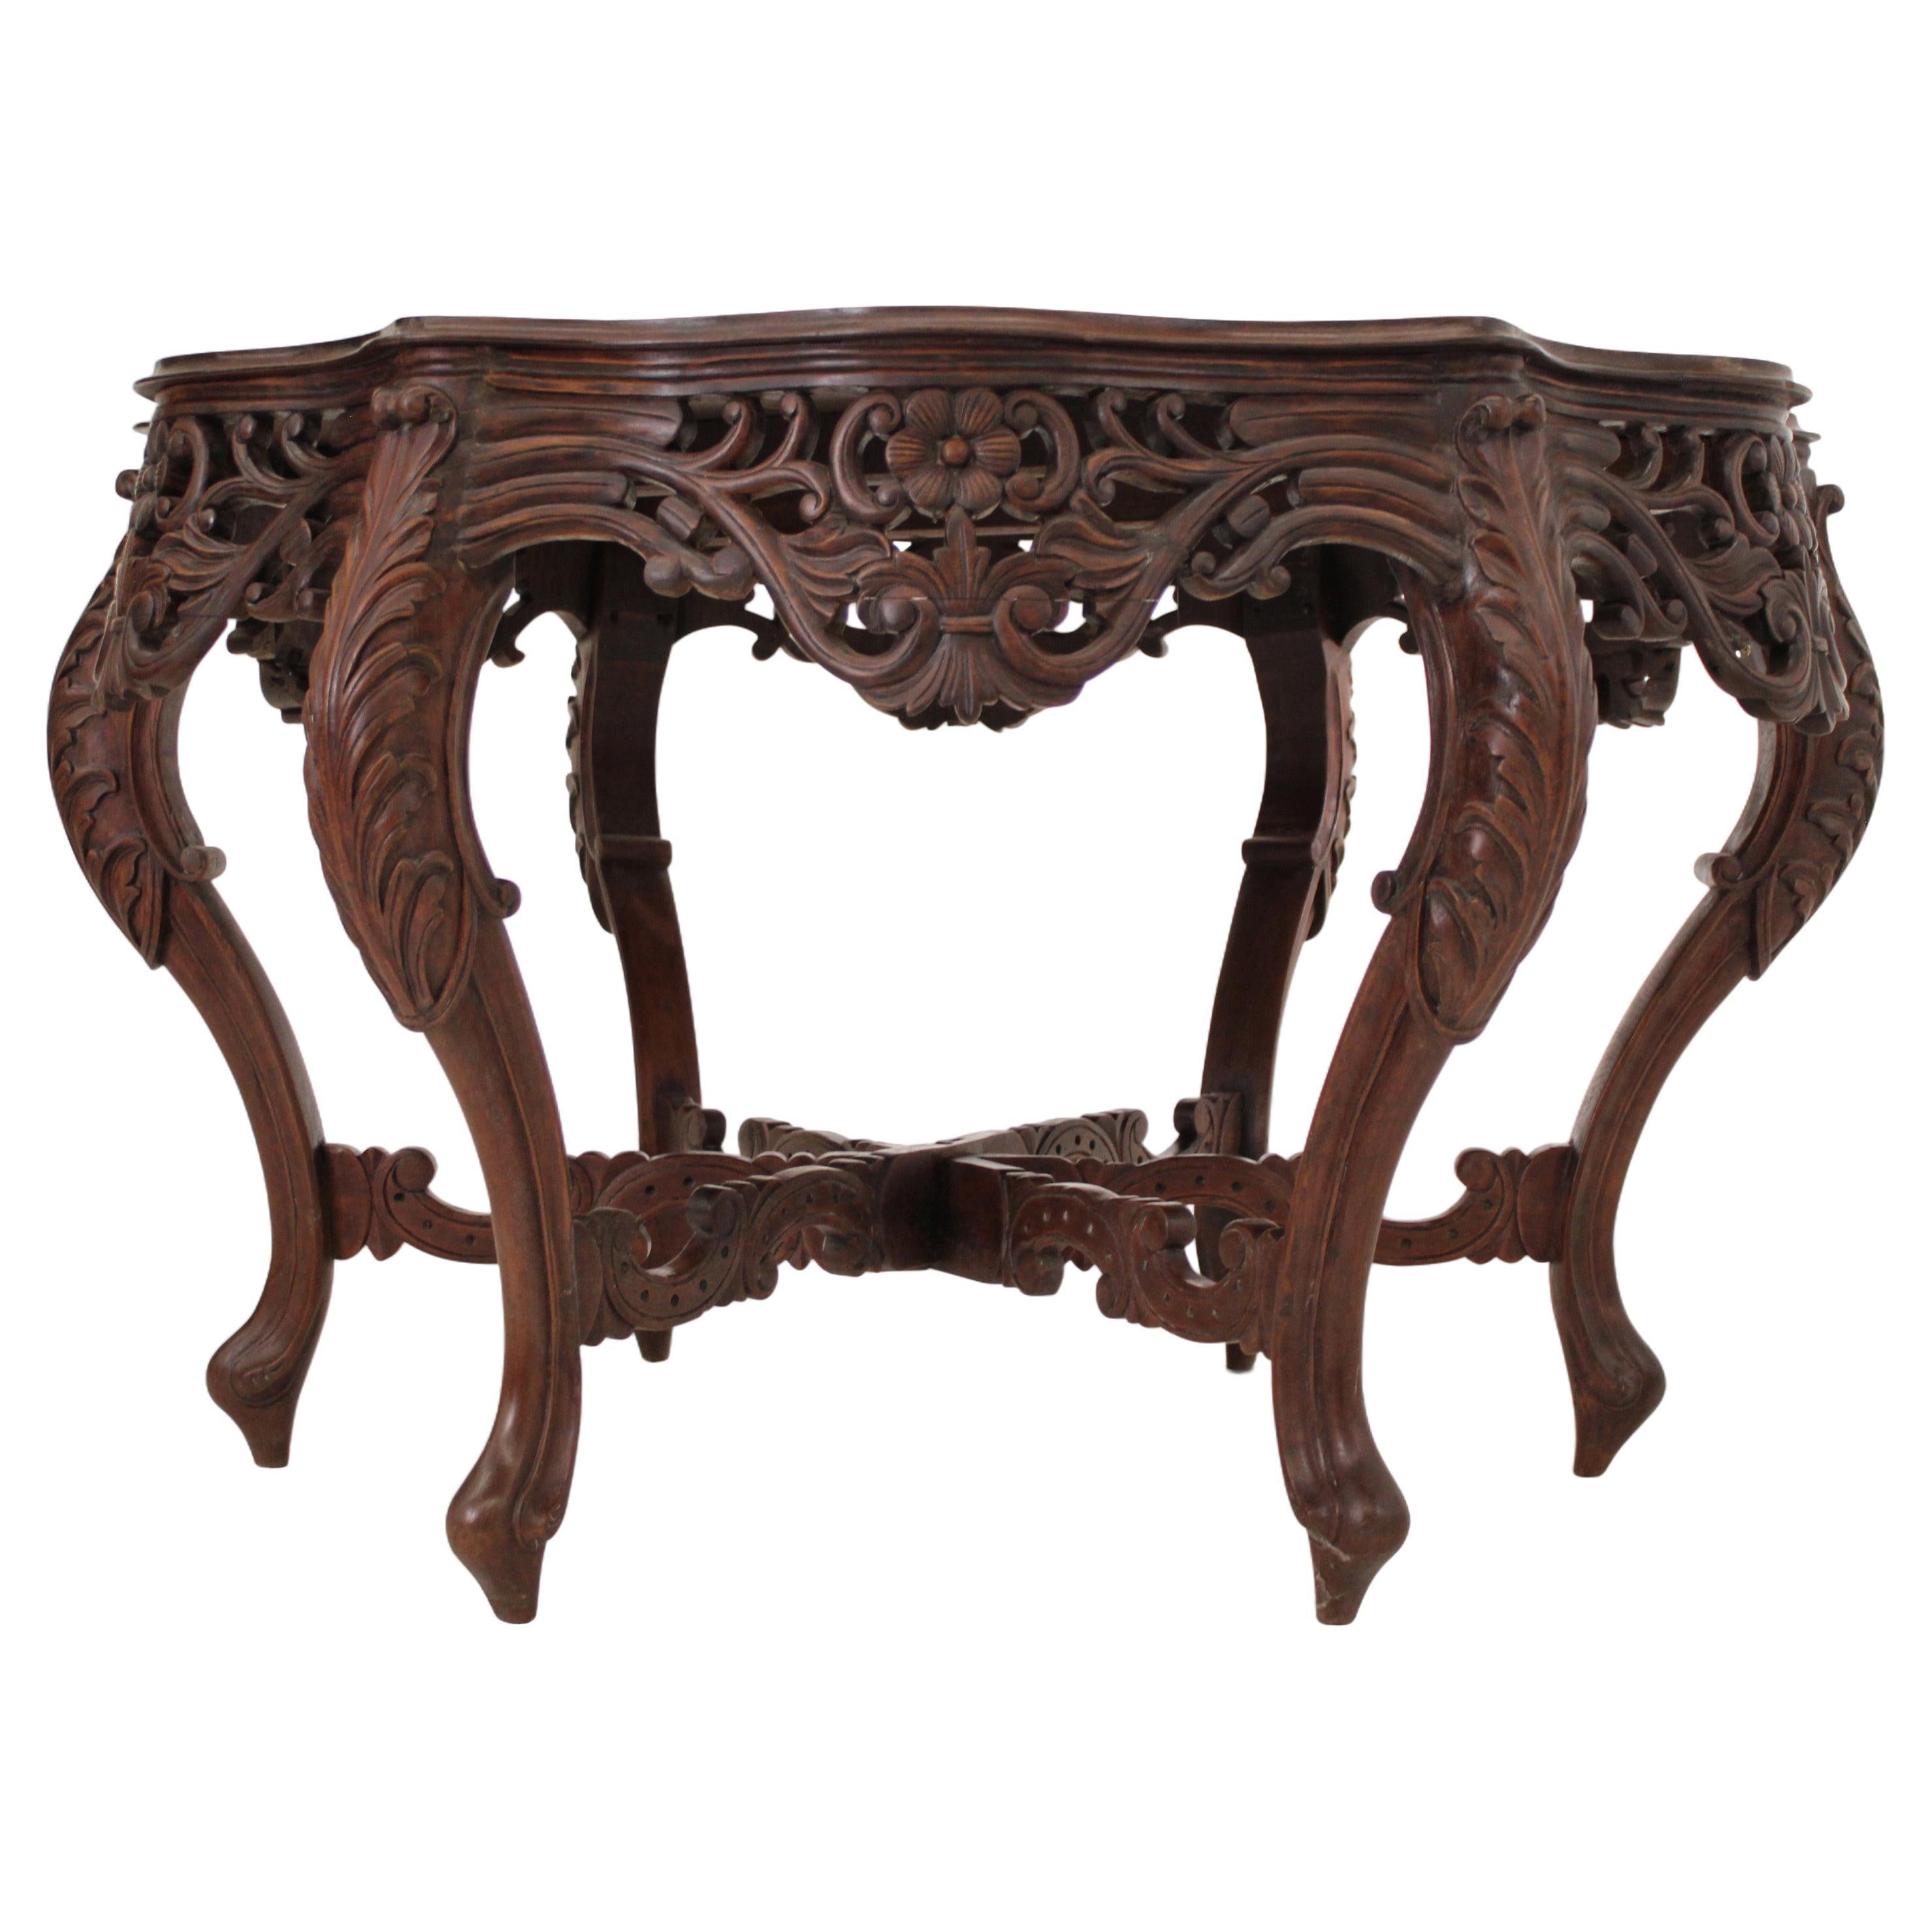 An exceptional carved Teak center table, with a serpentine-shaped top, carved from two broad planks of teak. The bombe-shaped sides add a touch of elegance. The table has the original set of intricately carved stretchers at the base and the